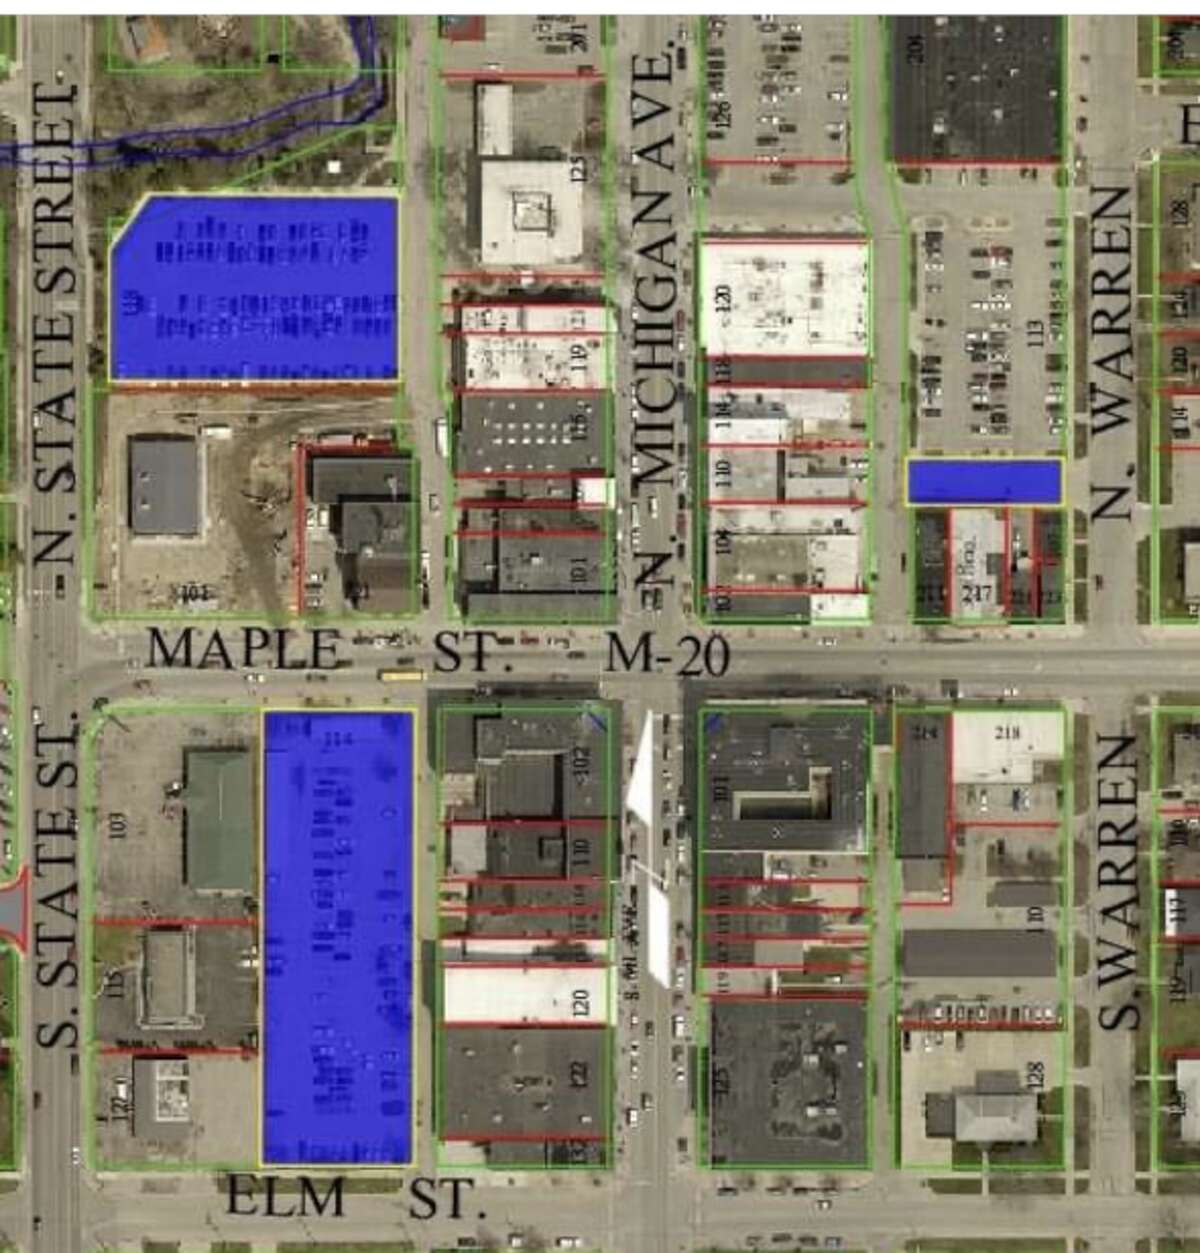 Three parking lots in downtown Big Rapids, shown in blue, will be closed temporarily as they are being repaved.